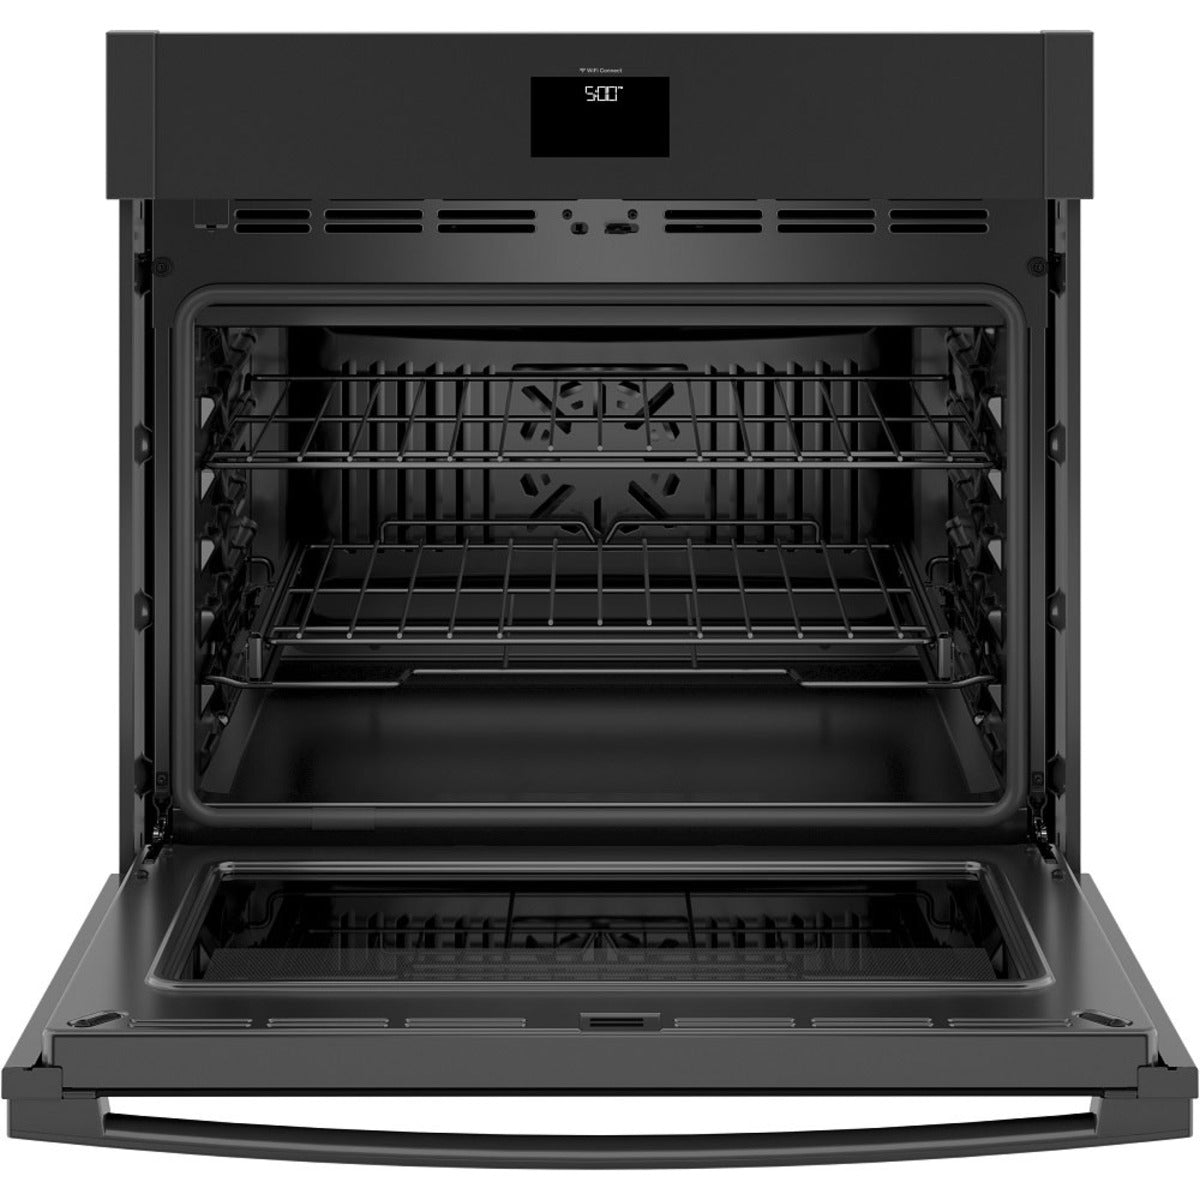 GE - 5 cu. ft Single Wall Oven in Black - JTS5000DNBB